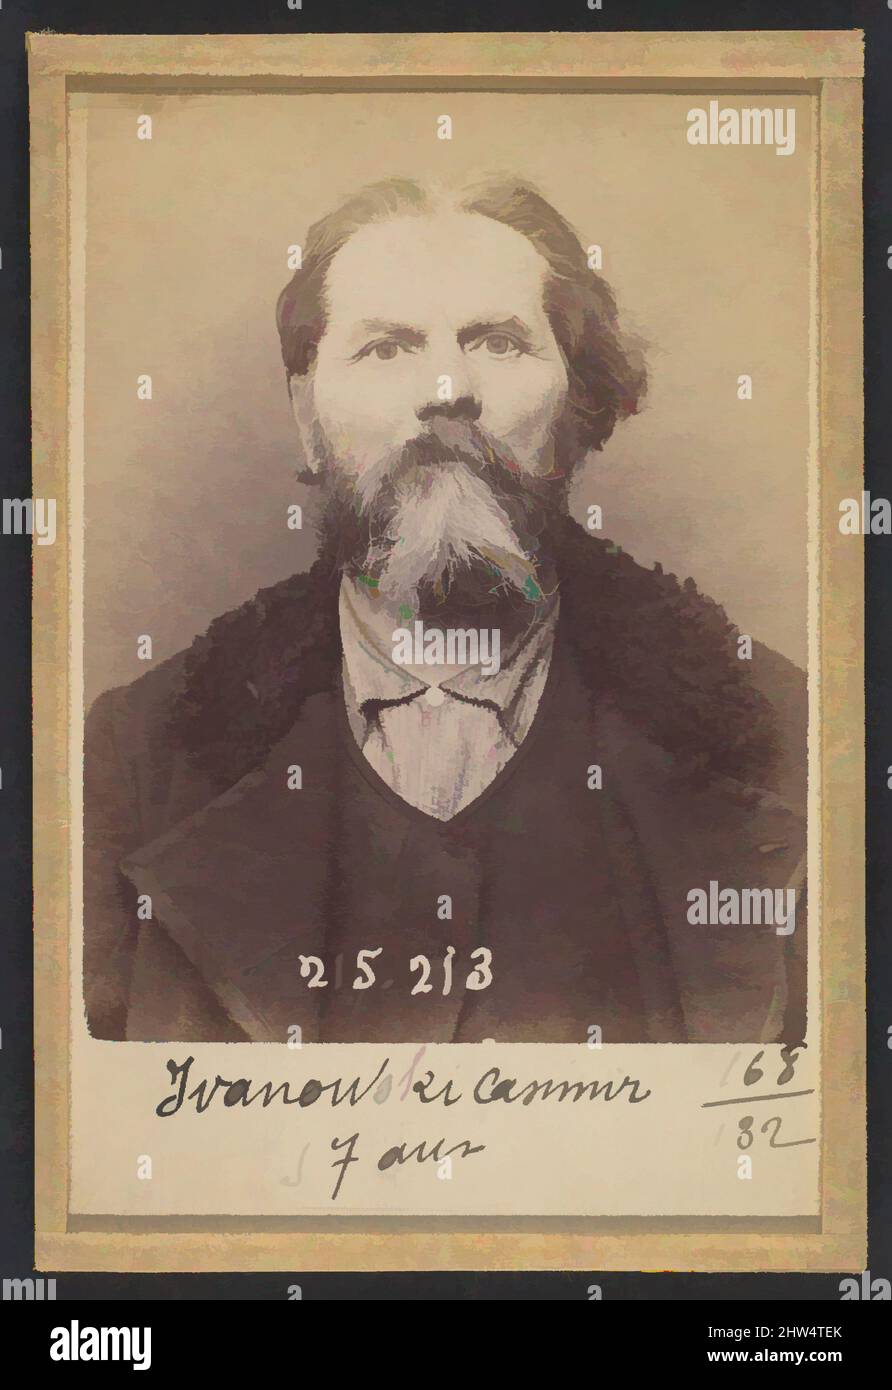 Art inspired by Iv(w)anowski. Casimir. 57 ans, né à Chalon-sur-Saône (Saône & Loire). Mécanicien. Anarchiste. 6/3/94., 1894, Albumen silver print from glass negative, 10.5 x 7 x 0.5 cm (4 1/8 x 2 3/4 x 3/16 in.) each, Photographs, Alphonse Bertillon (French, 1853–1914), Born into a, Classic works modernized by Artotop with a splash of modernity. Shapes, color and value, eye-catching visual impact on art. Emotions through freedom of artworks in a contemporary way. A timeless message pursuing a wildly creative new direction. Artists turning to the digital medium and creating the Artotop NFT Stock Photo